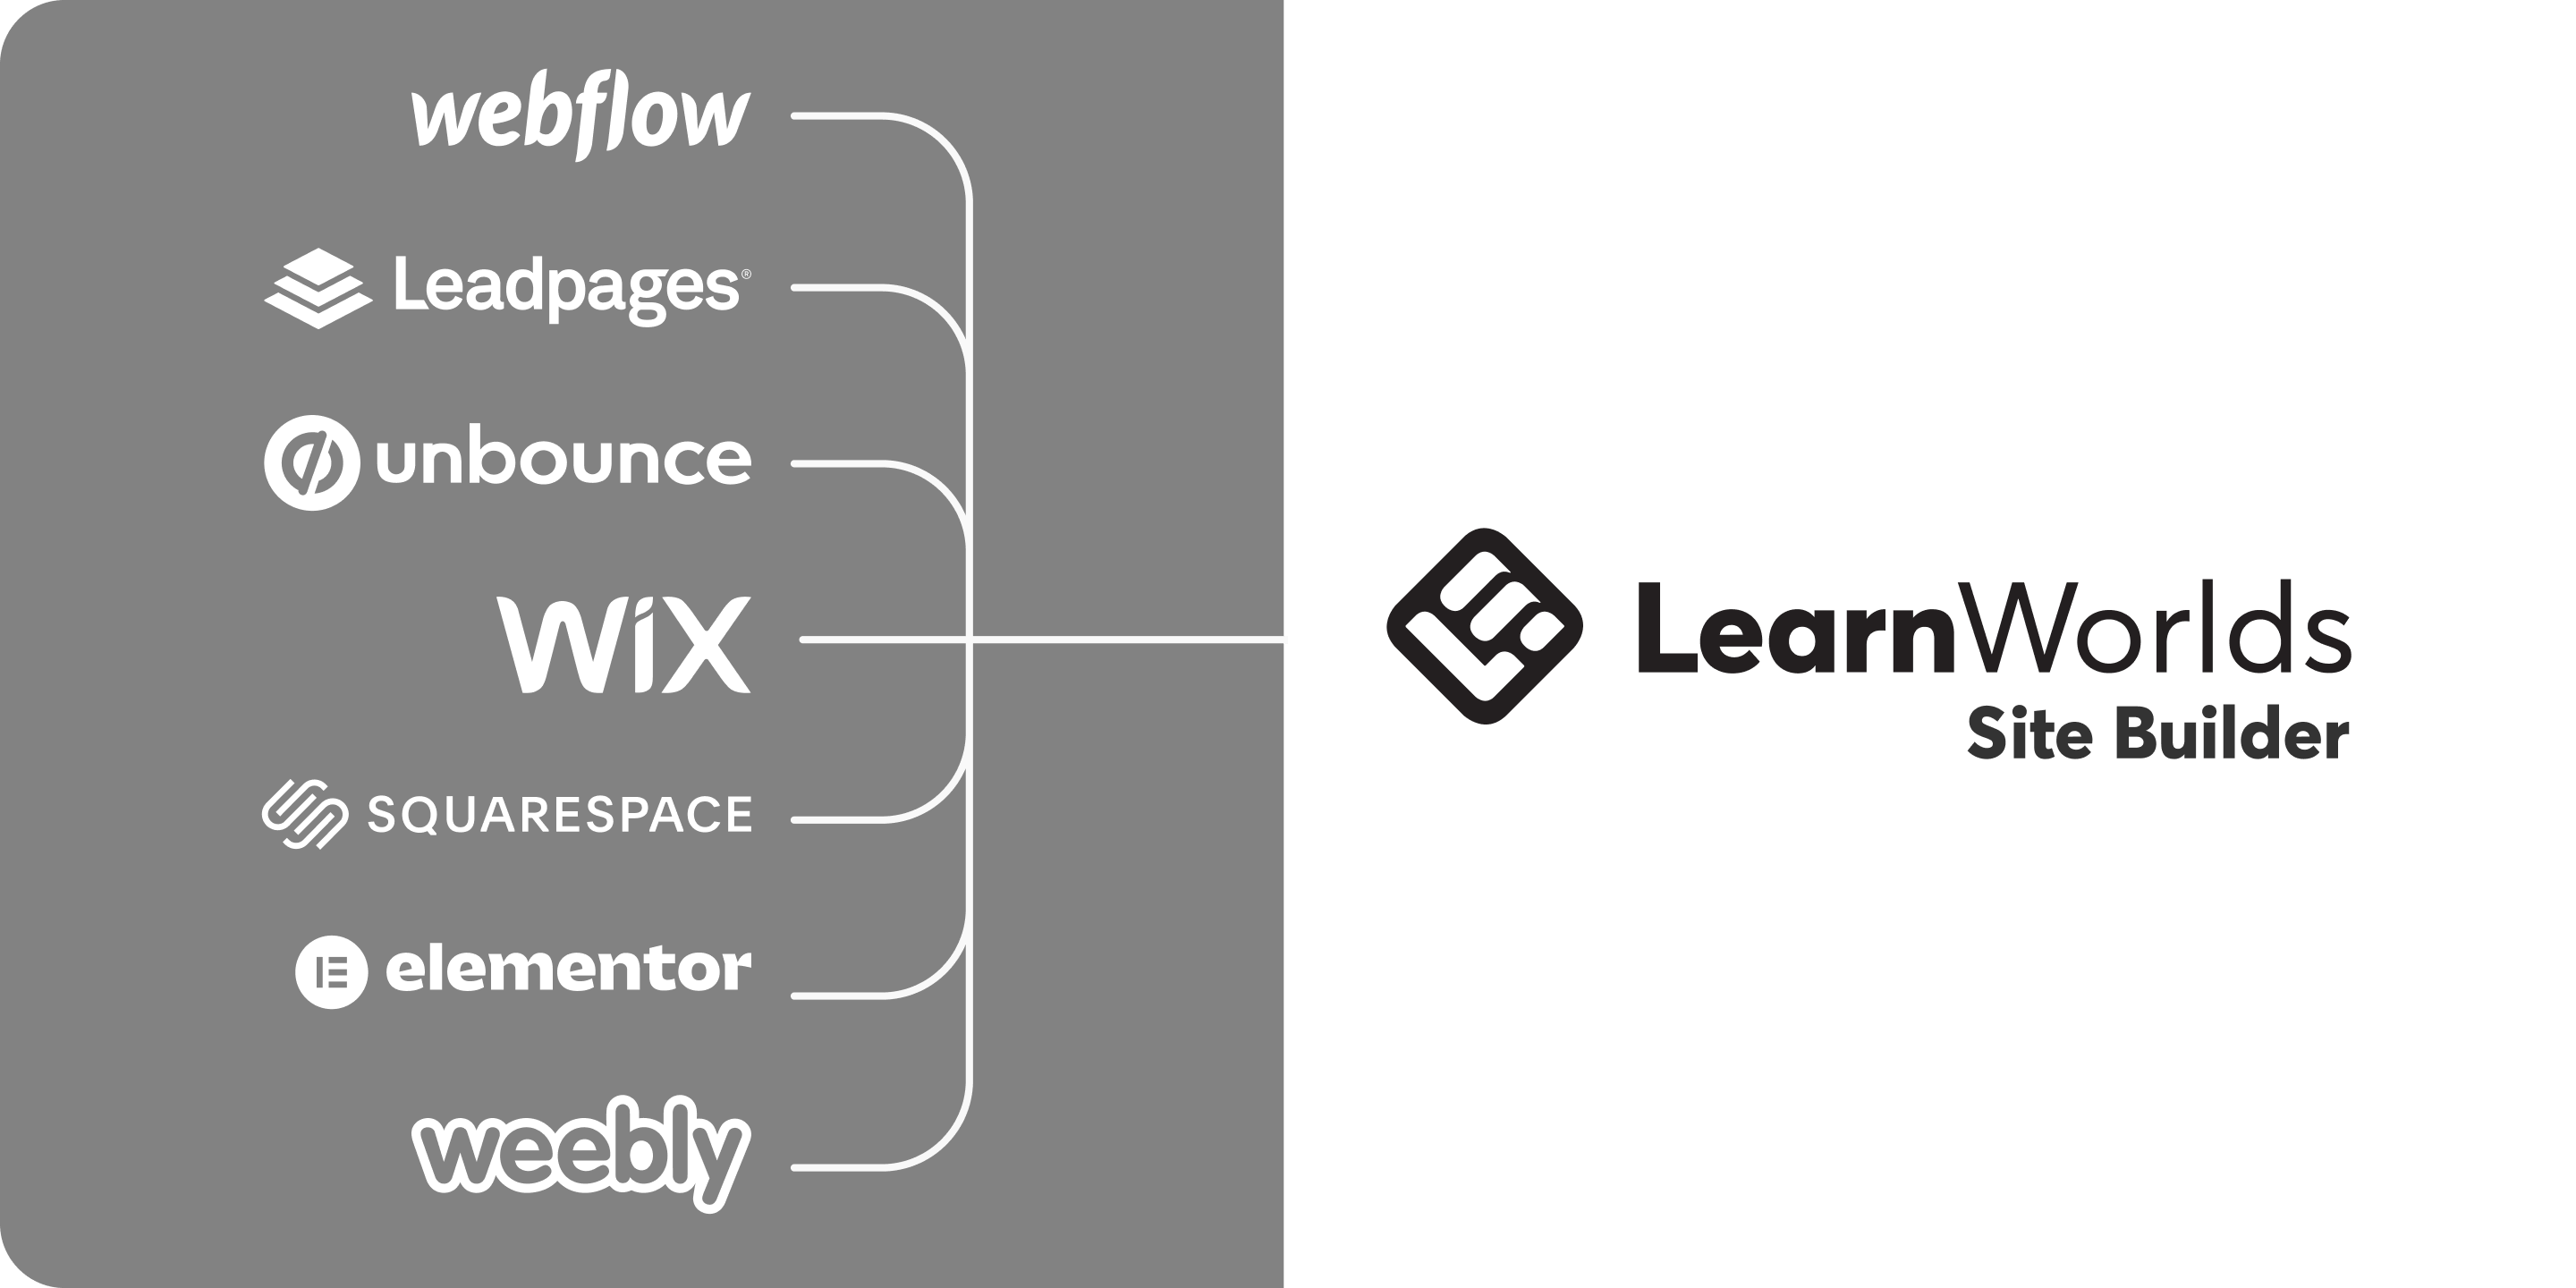 LearnWorlds's Site Builder can replace services like webflow, unbounce, wix, squarespace, elementor, leadpages, weebly and more.